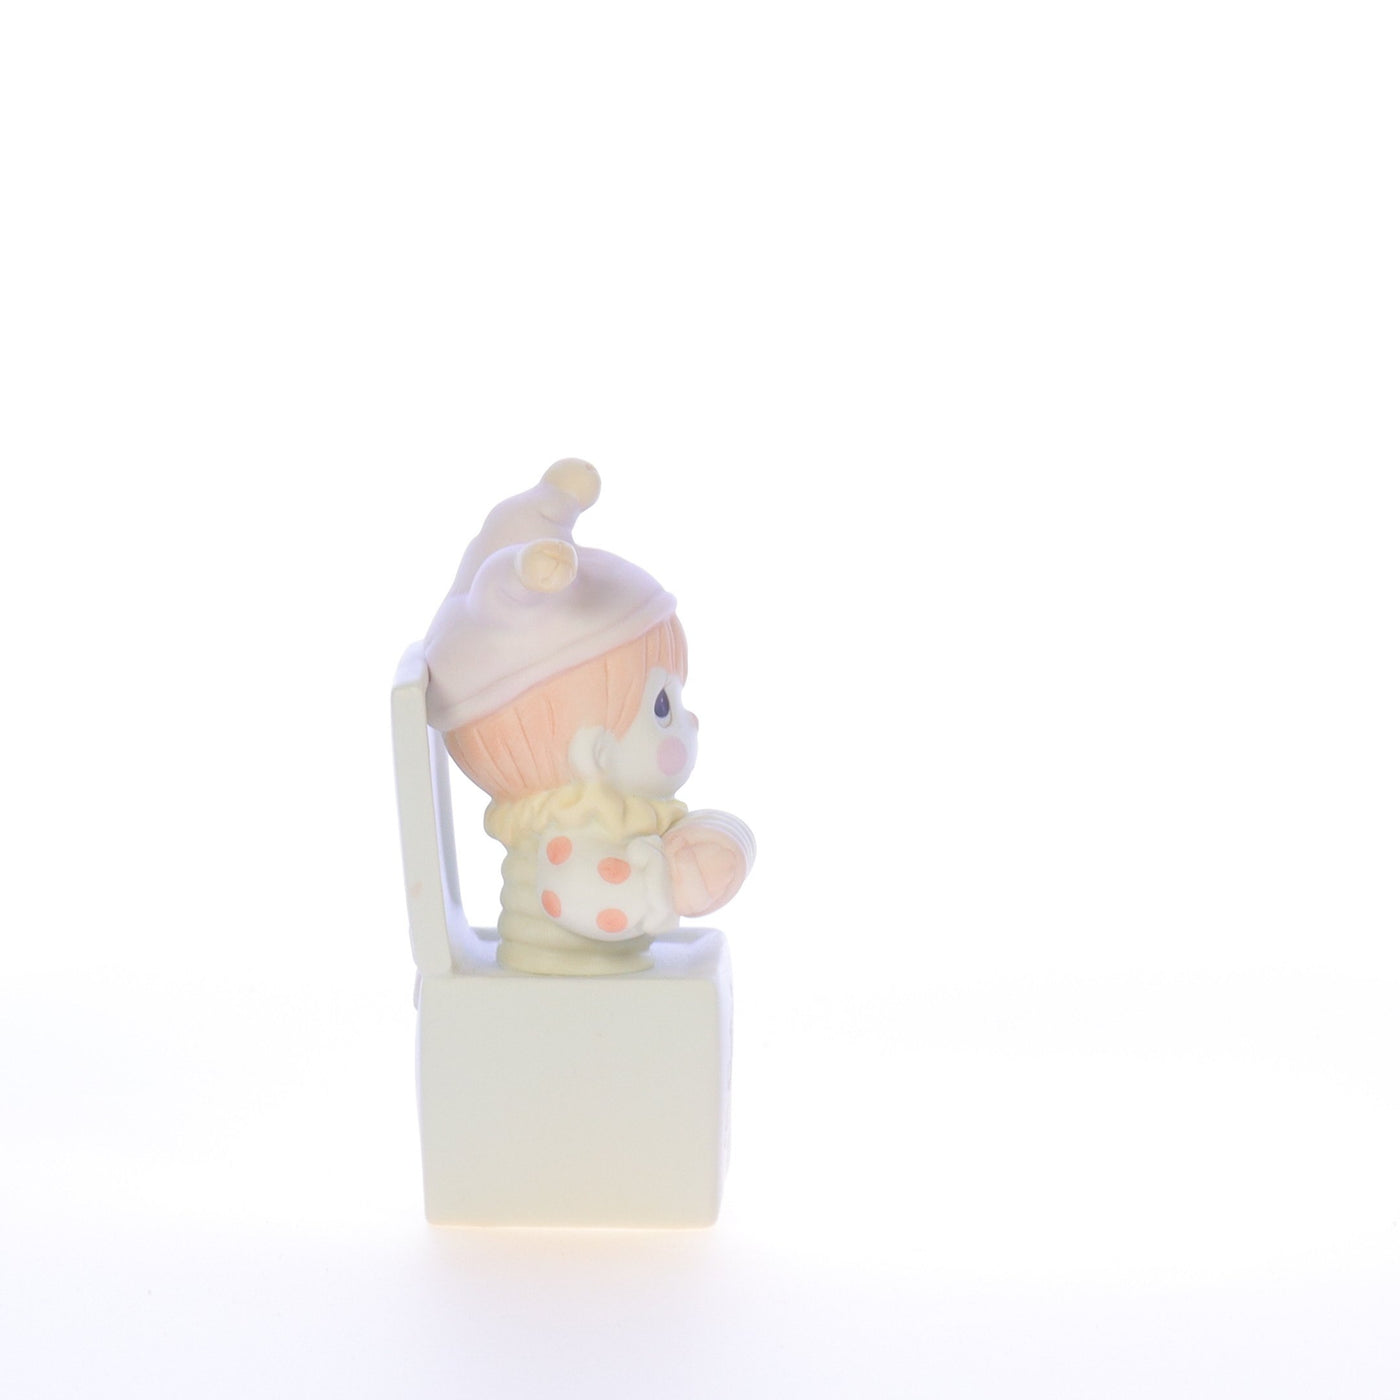 Precious_Moments_Porcelain_Figurine_Just_To_Let_You_Know_Youre_Tops_B0006_07